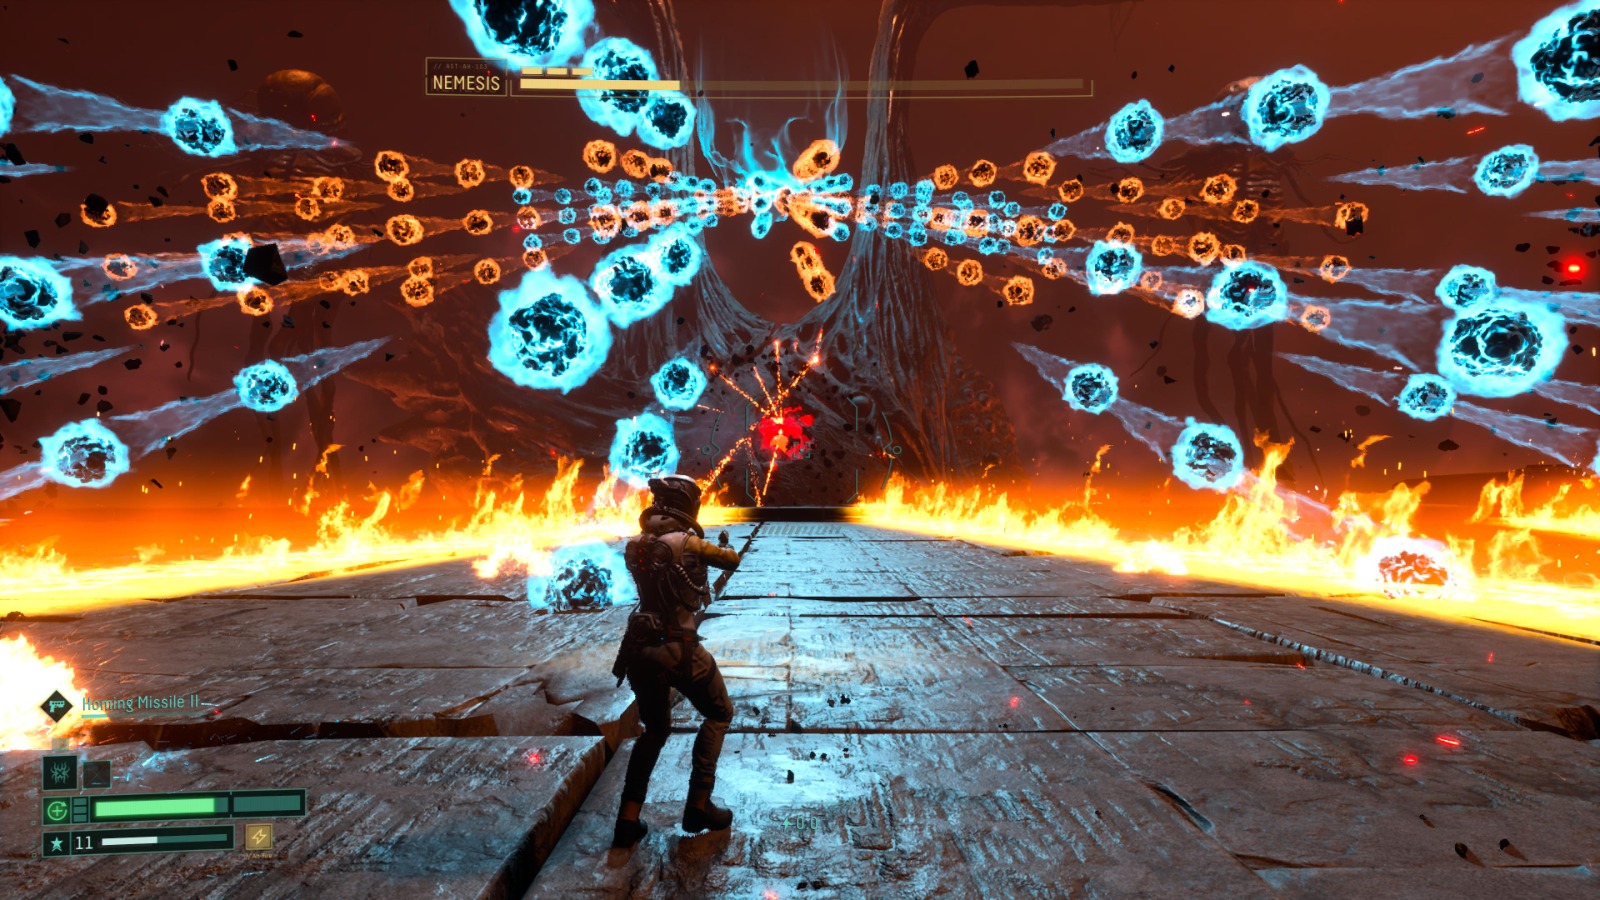 A depiction of Returnal's bullet hell gameplay